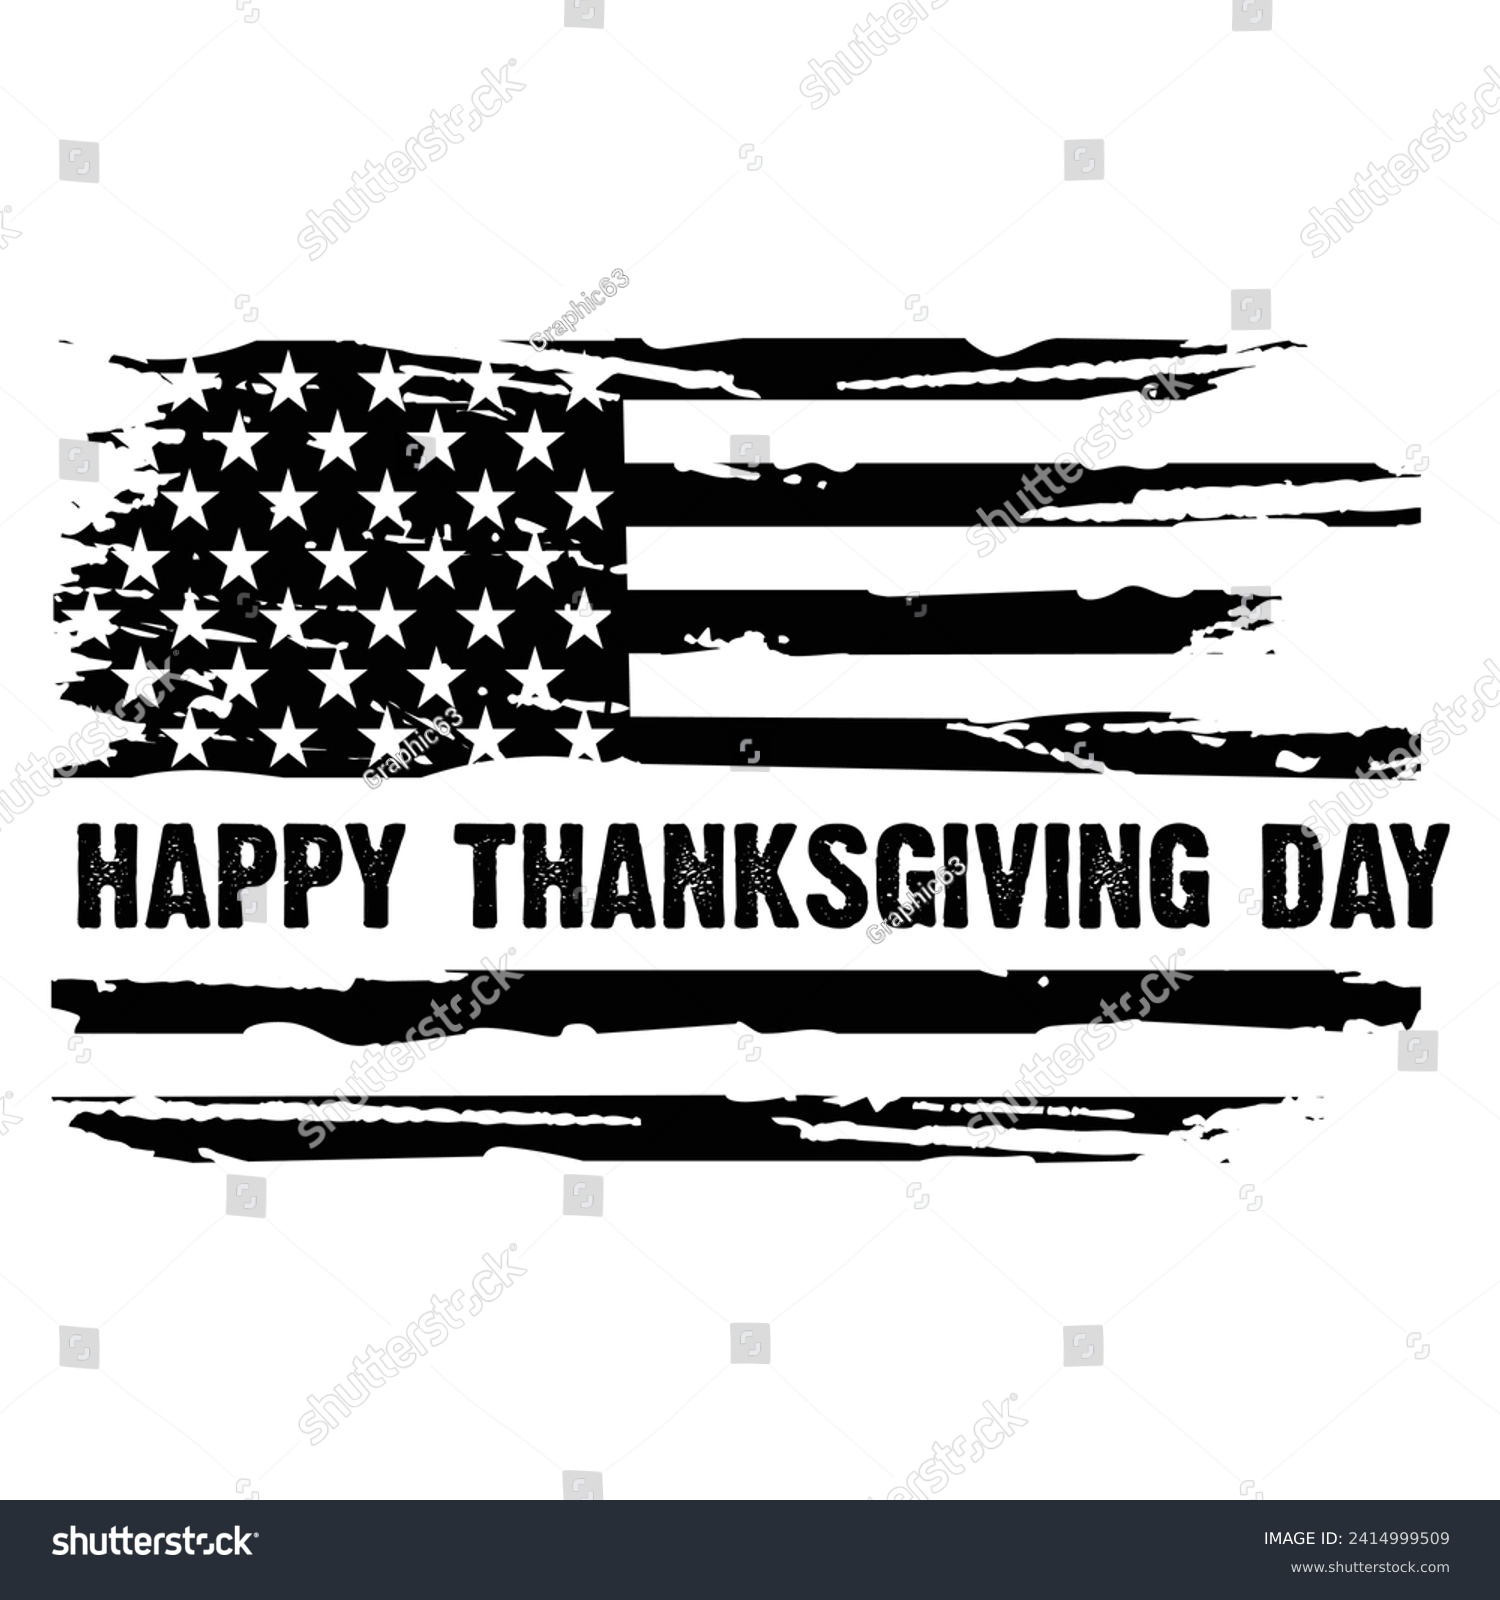 SVG of Distressed Happy Thanksgiving Day Usa American Design For T Shirt Poster Banner Backround Print Vector Eps Illustrations. svg